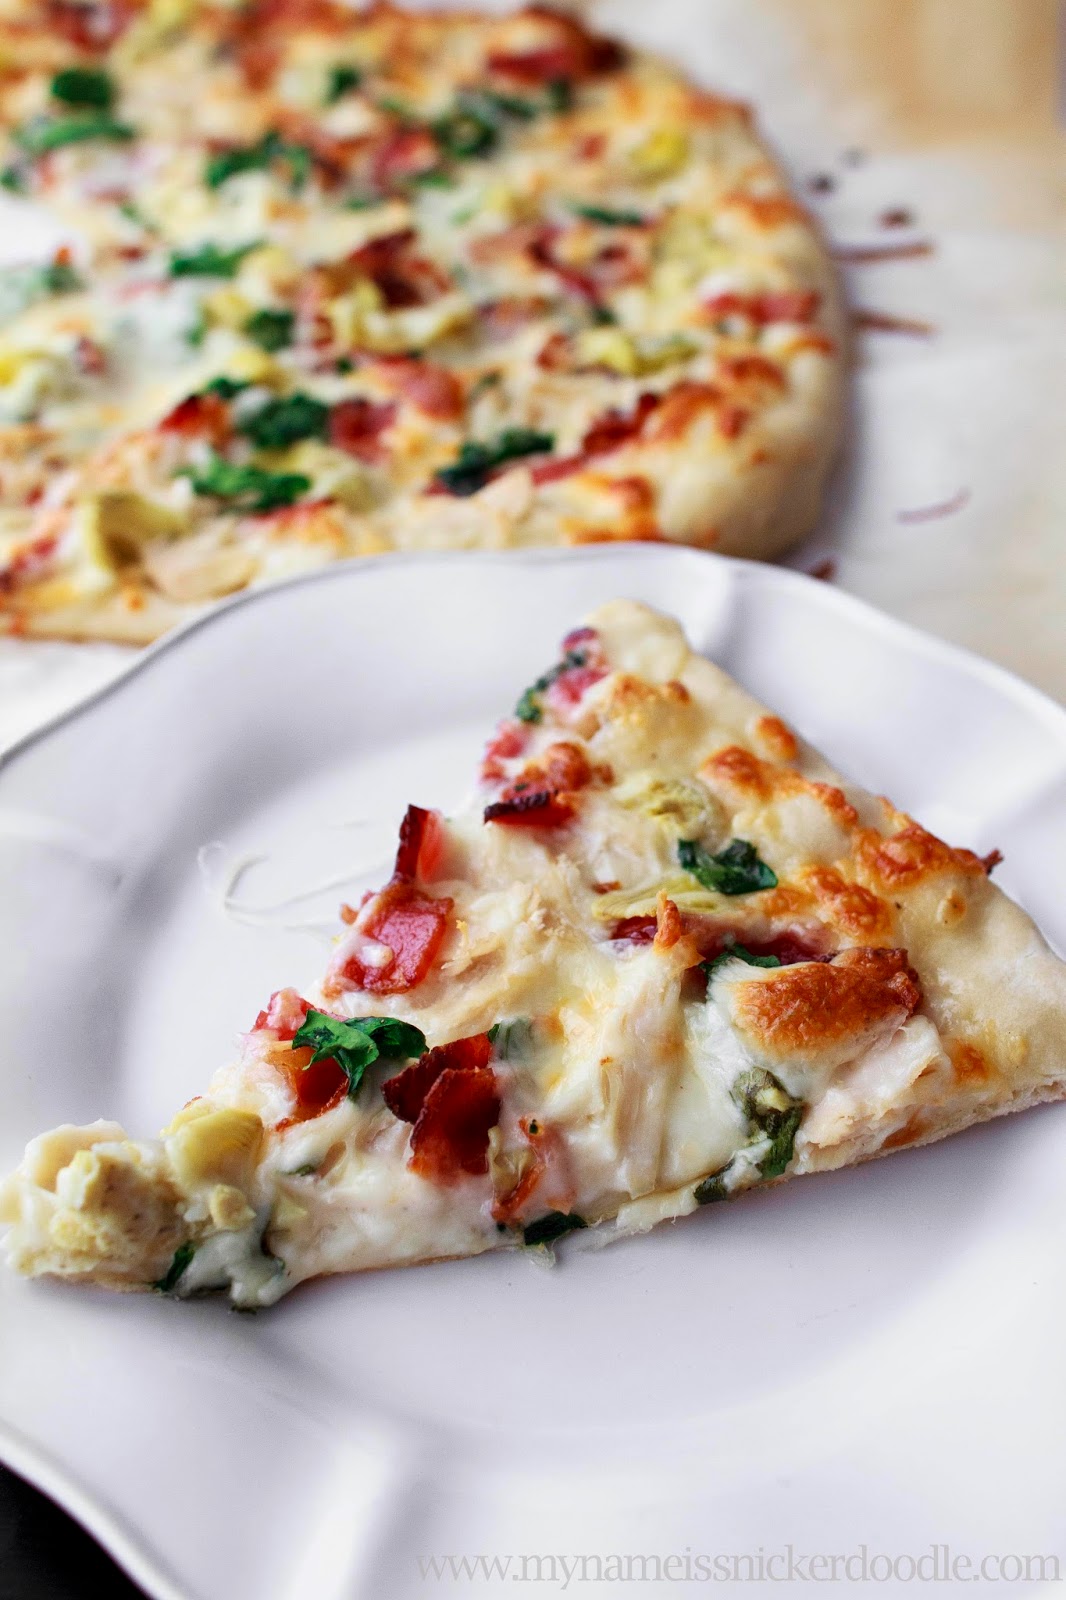 My Name Is Snickerdoodle: Chicken Artichoke Bacon Pizza with a Creamy ...